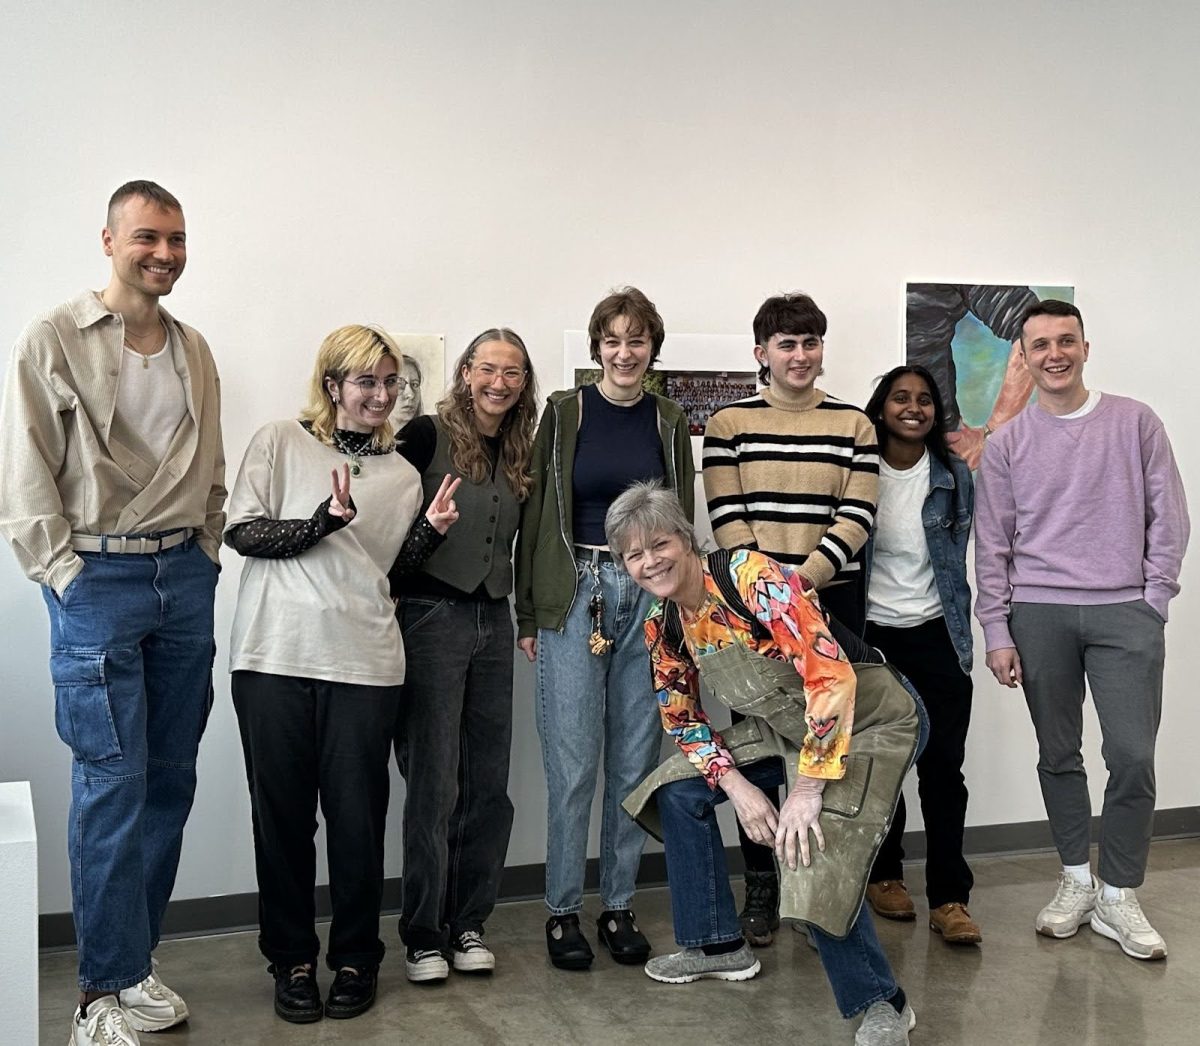 Cat Reddington, one of the two juror’s award winning students, in the striped crewneck standing with other fellow student artists. (Photo by Bridgette Fraga)